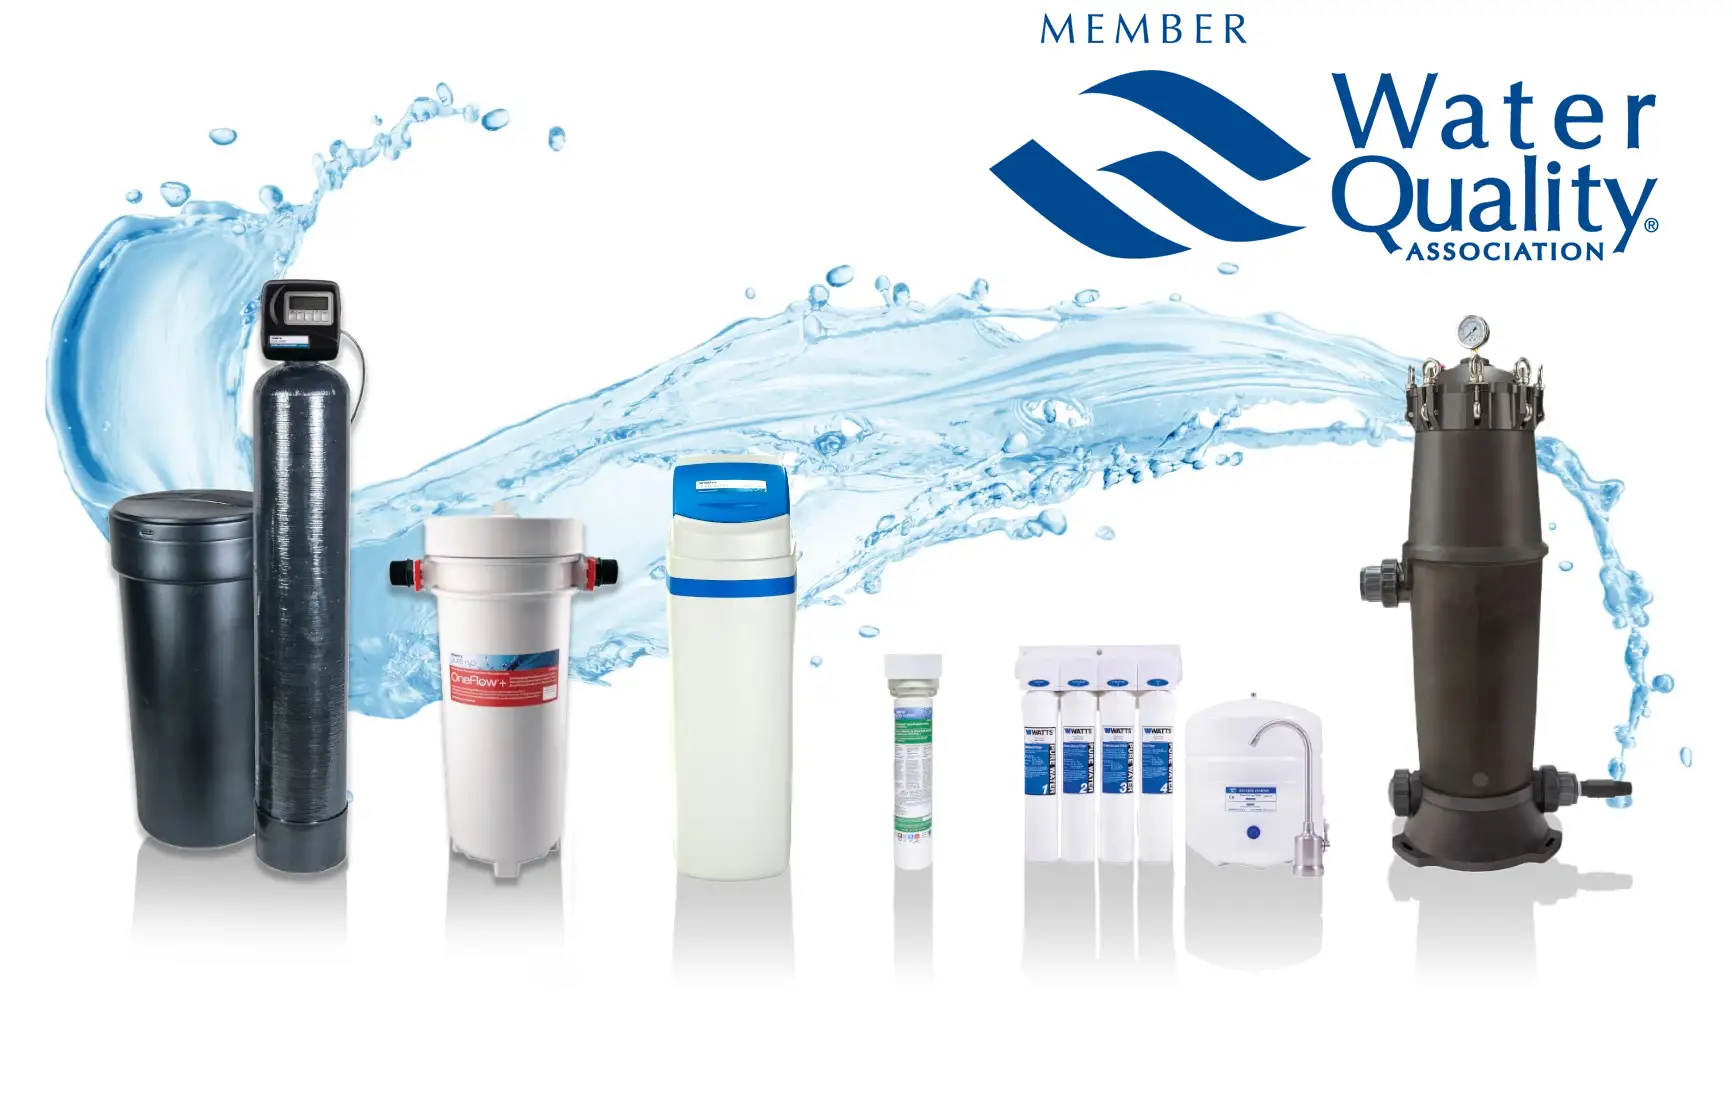 Lineup of Roto-Rooter water softening and filtration products